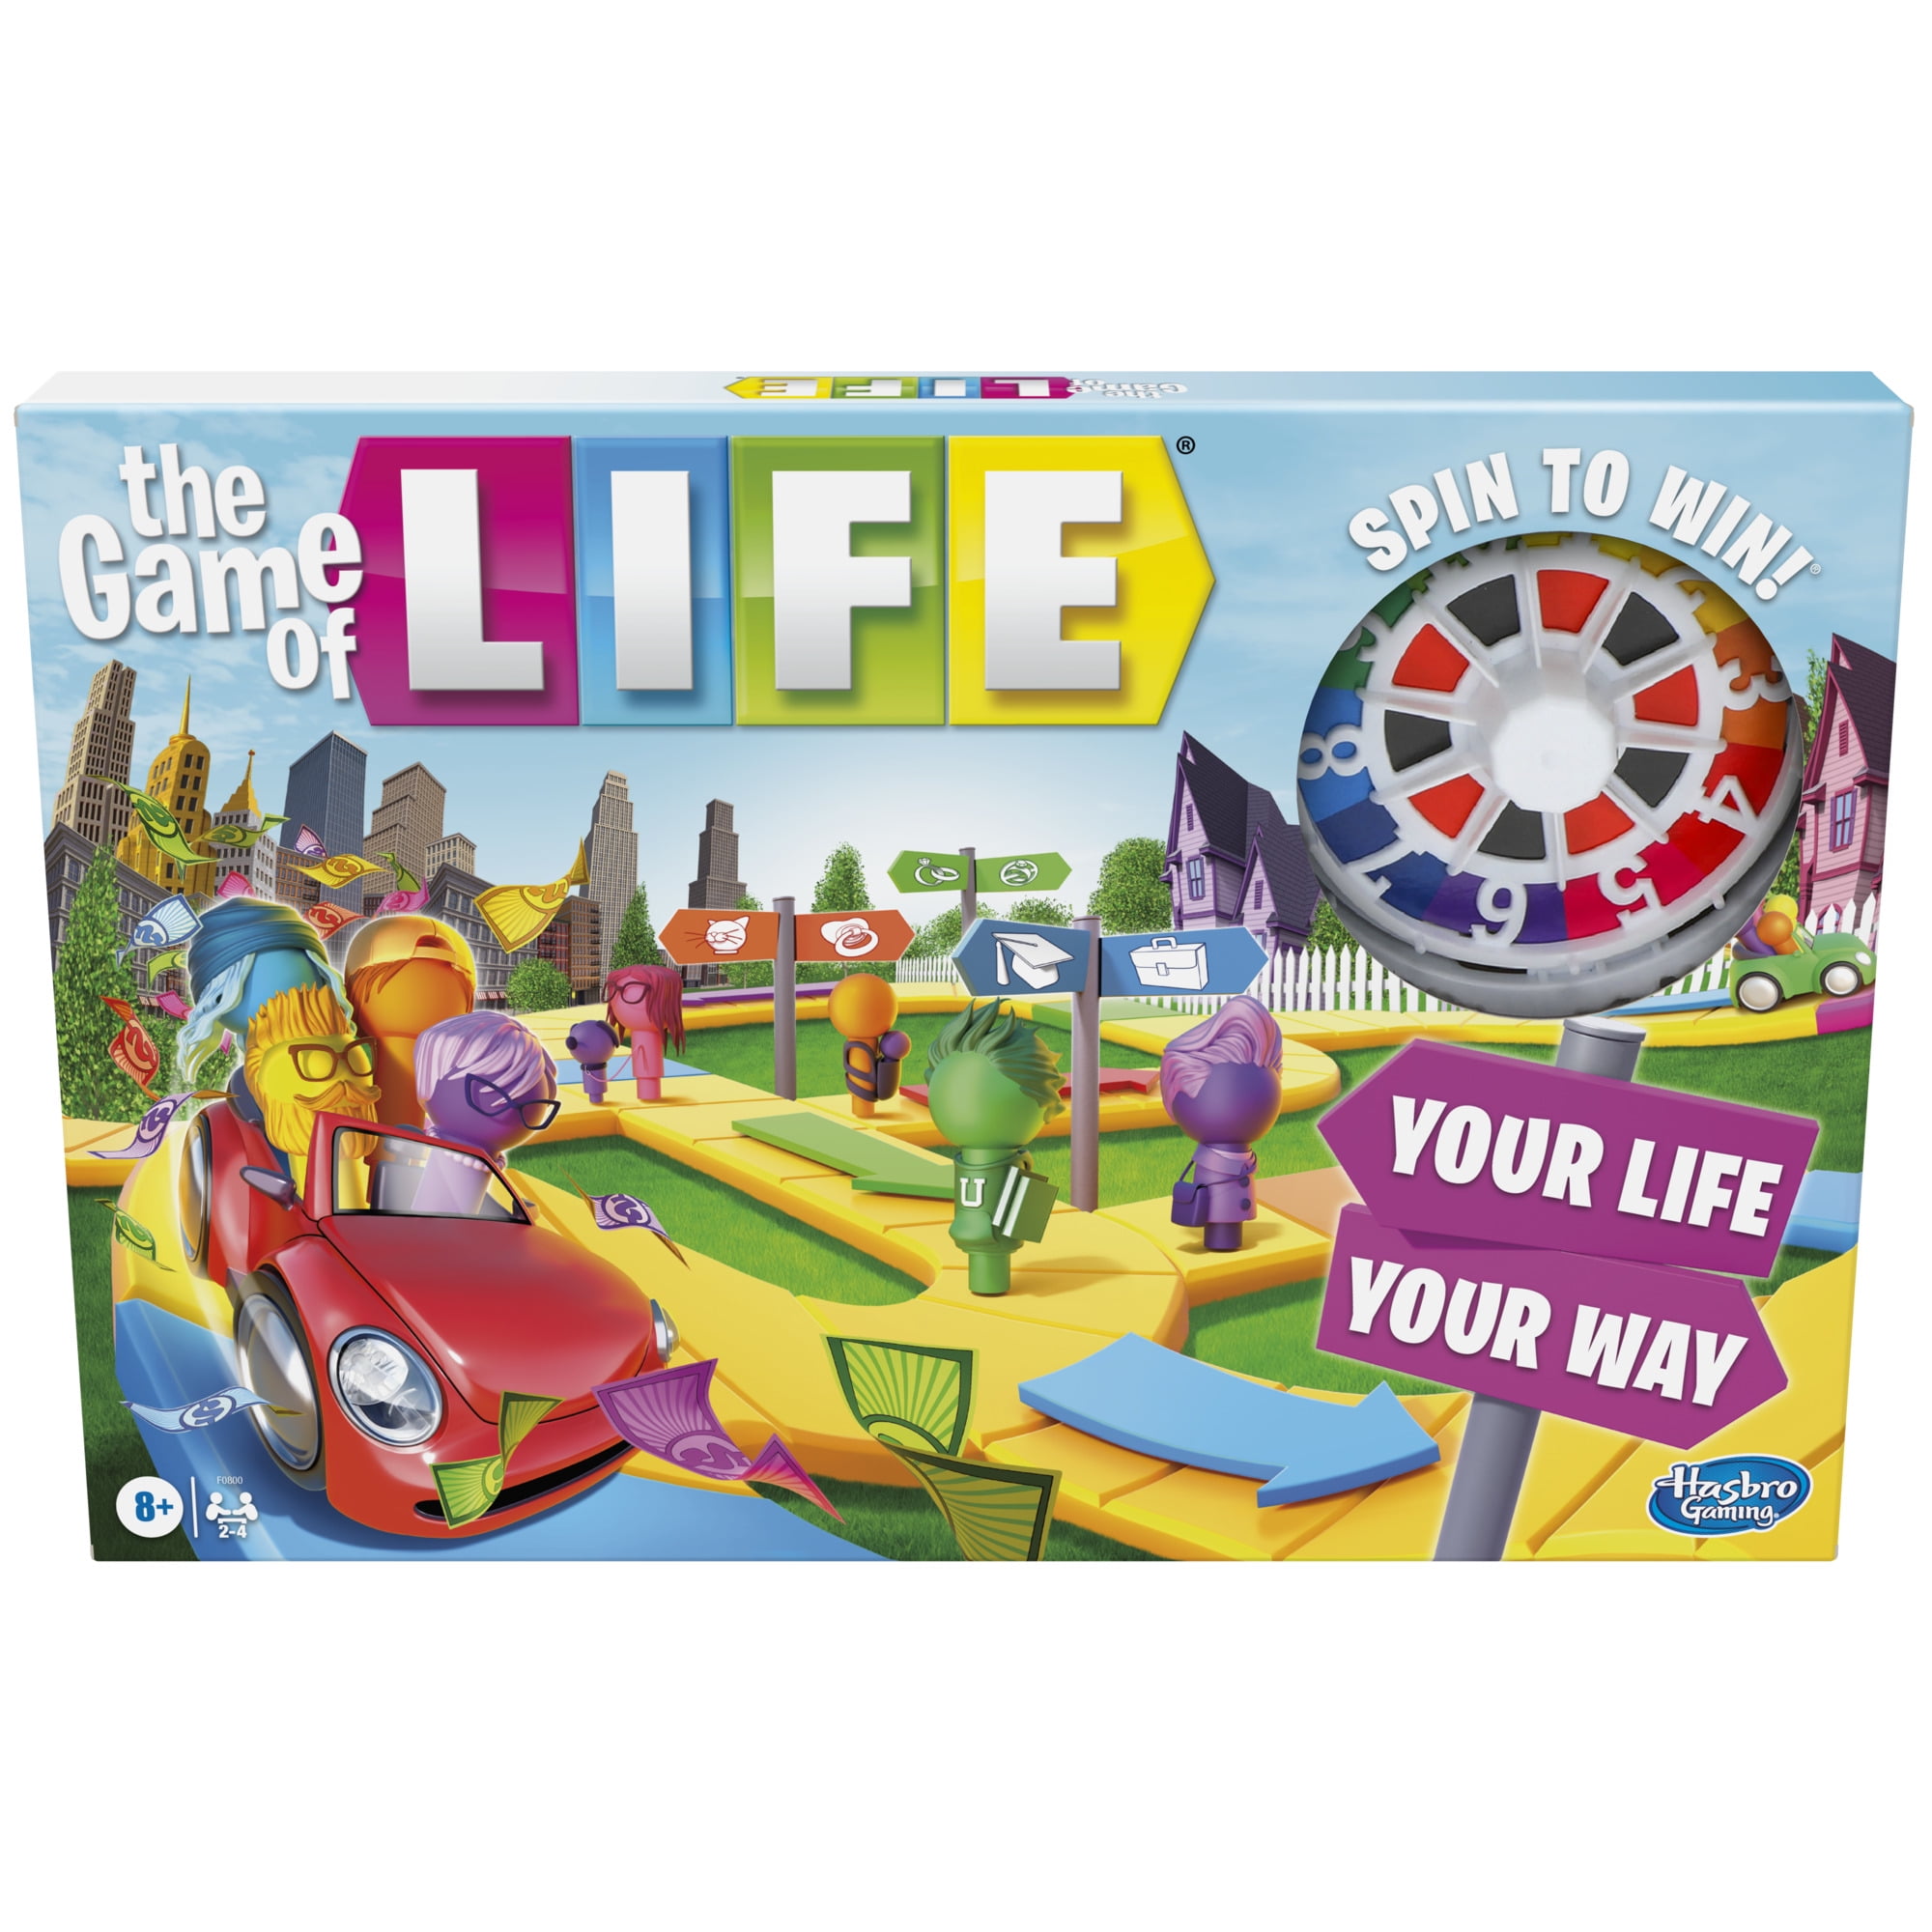 Game of the Year, Board Game